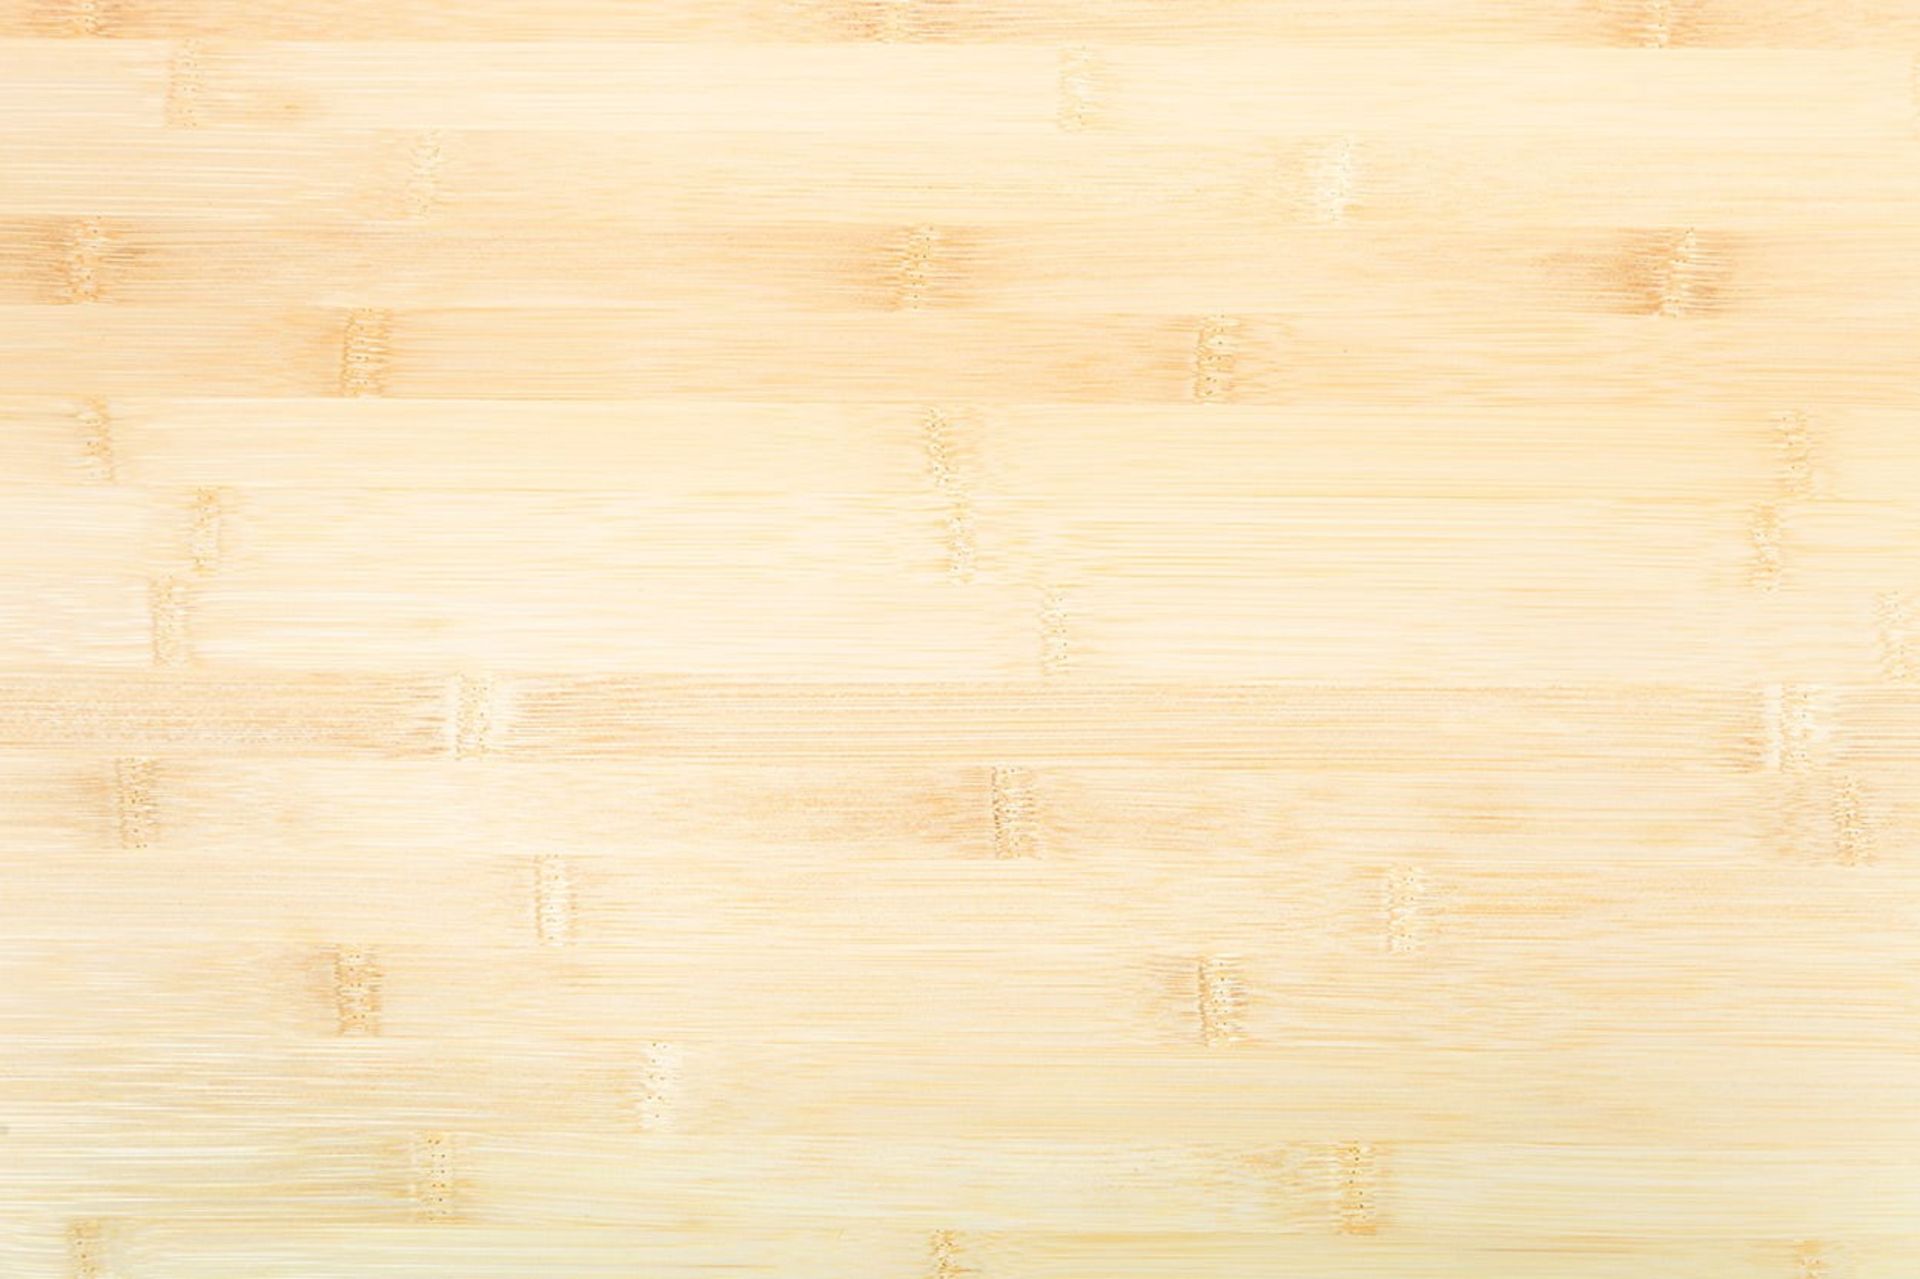 1 x Layered Solid Bamboo Wood Worktop - Size: 3000 x 650 x 40mm - Ideal For Kitchens, Countertops, - Image 2 of 5